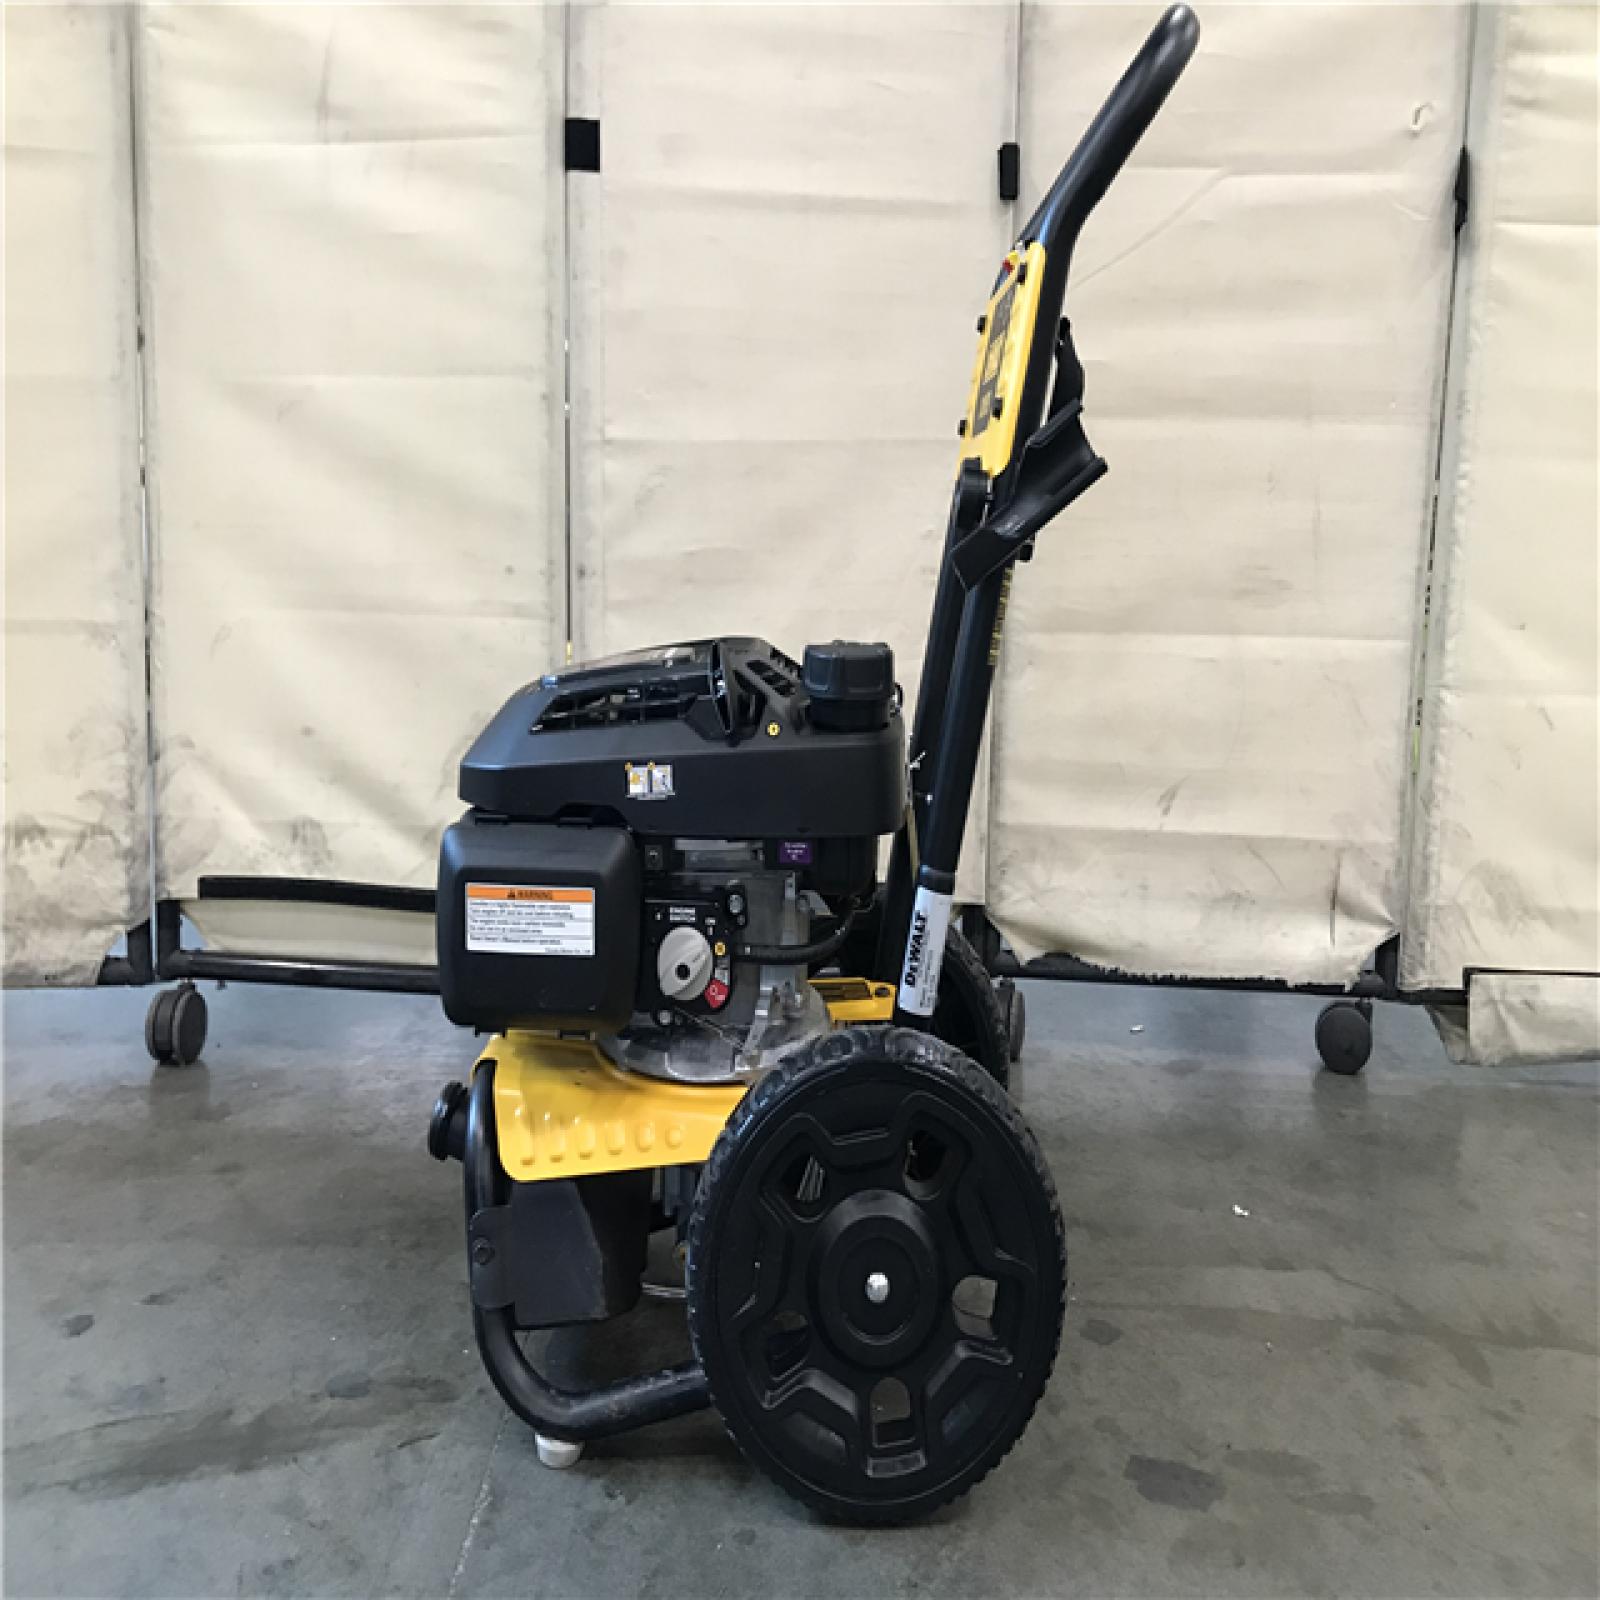 California AS-IS DEWALT 3100 PSI at 2.3 GPM Honda Cold Water Professional Gas Pressure Washer-Appears LIKE-NEW Condition